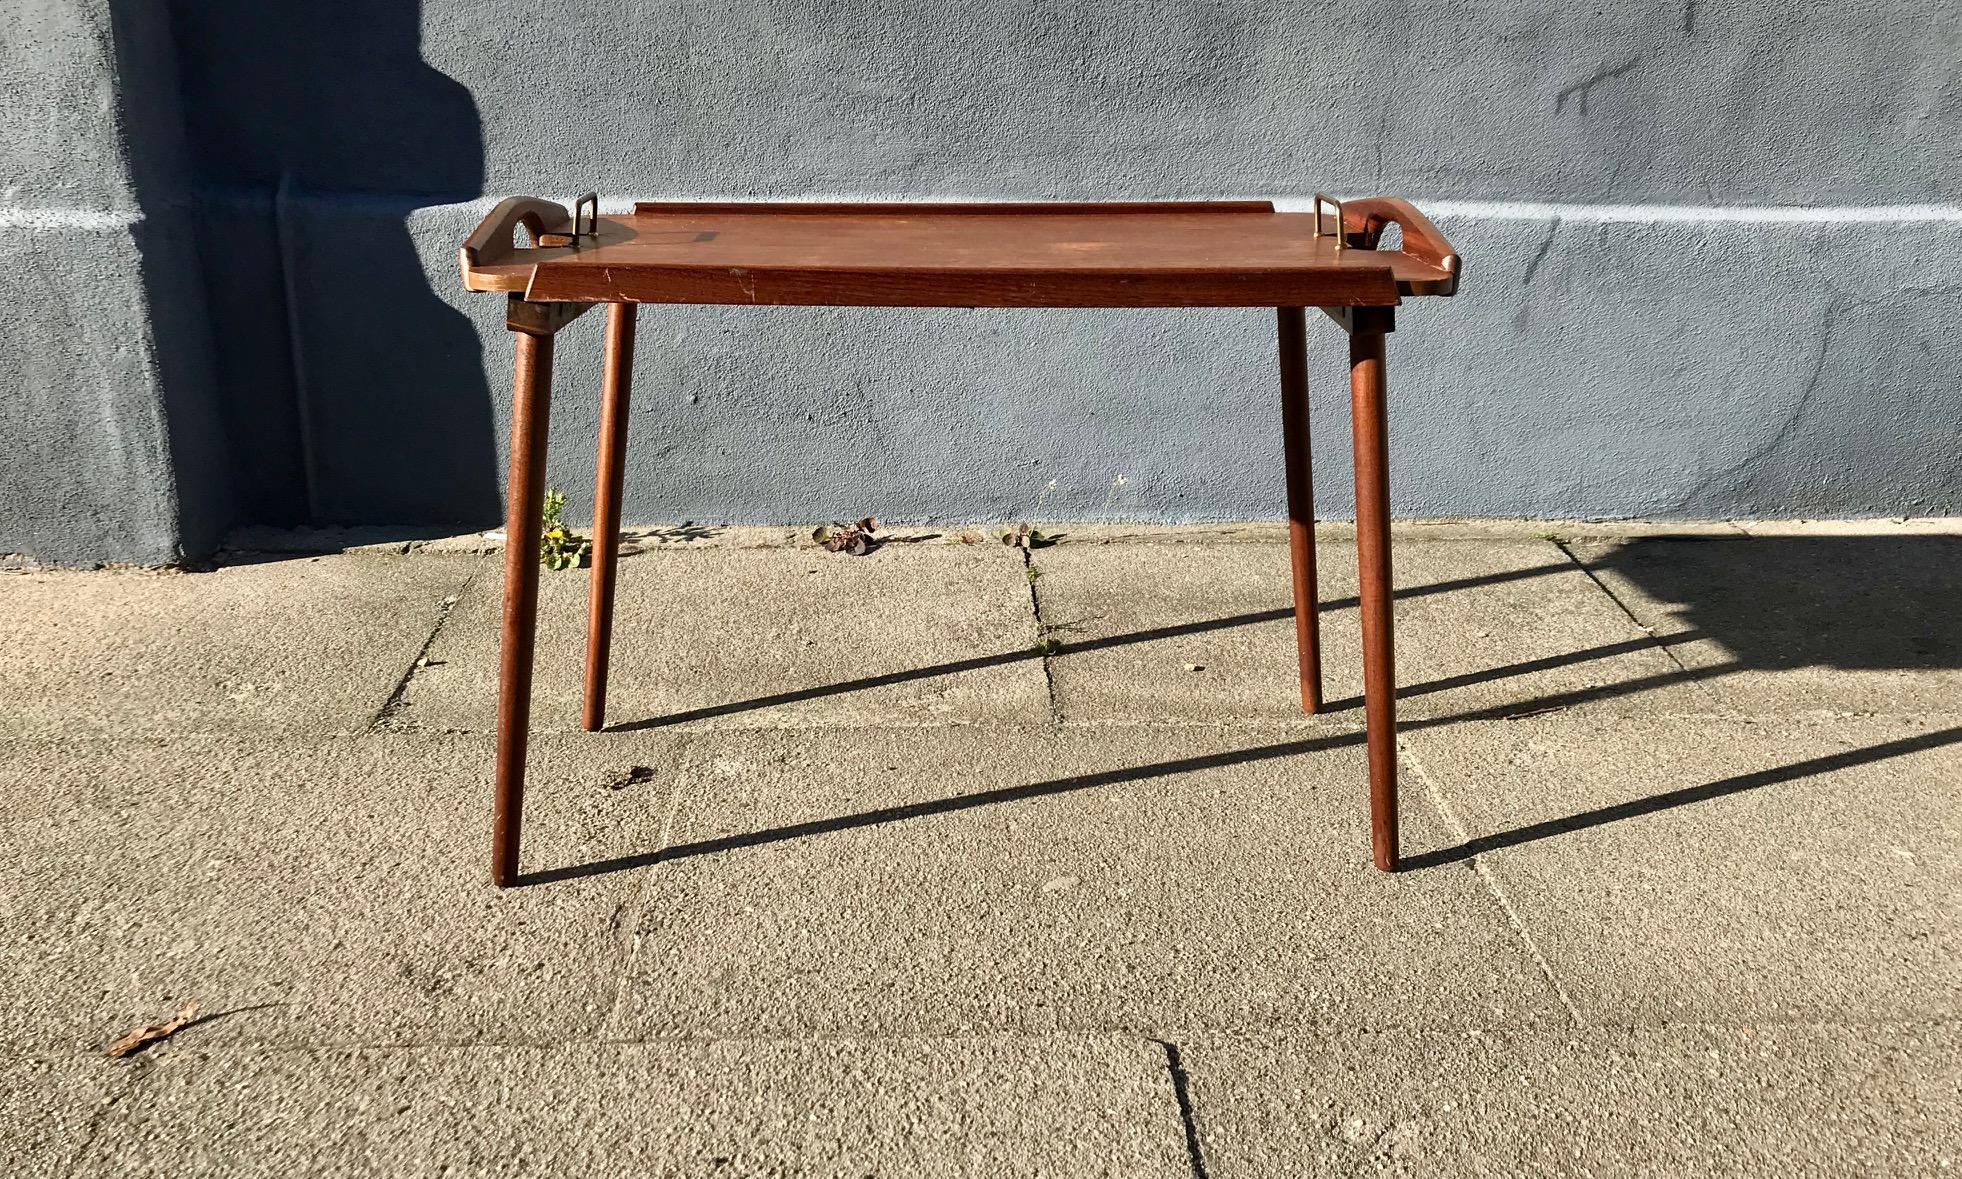 'Tixi' - rare foldable teak, oak and brass tray designed by Bendt Winge in the 1950s and manufactured from circa 1960 by Aase Dreieri in Norway. The features foldable legs that via a mechanism to the back 'sucks' the legs in to a flat position. It’s